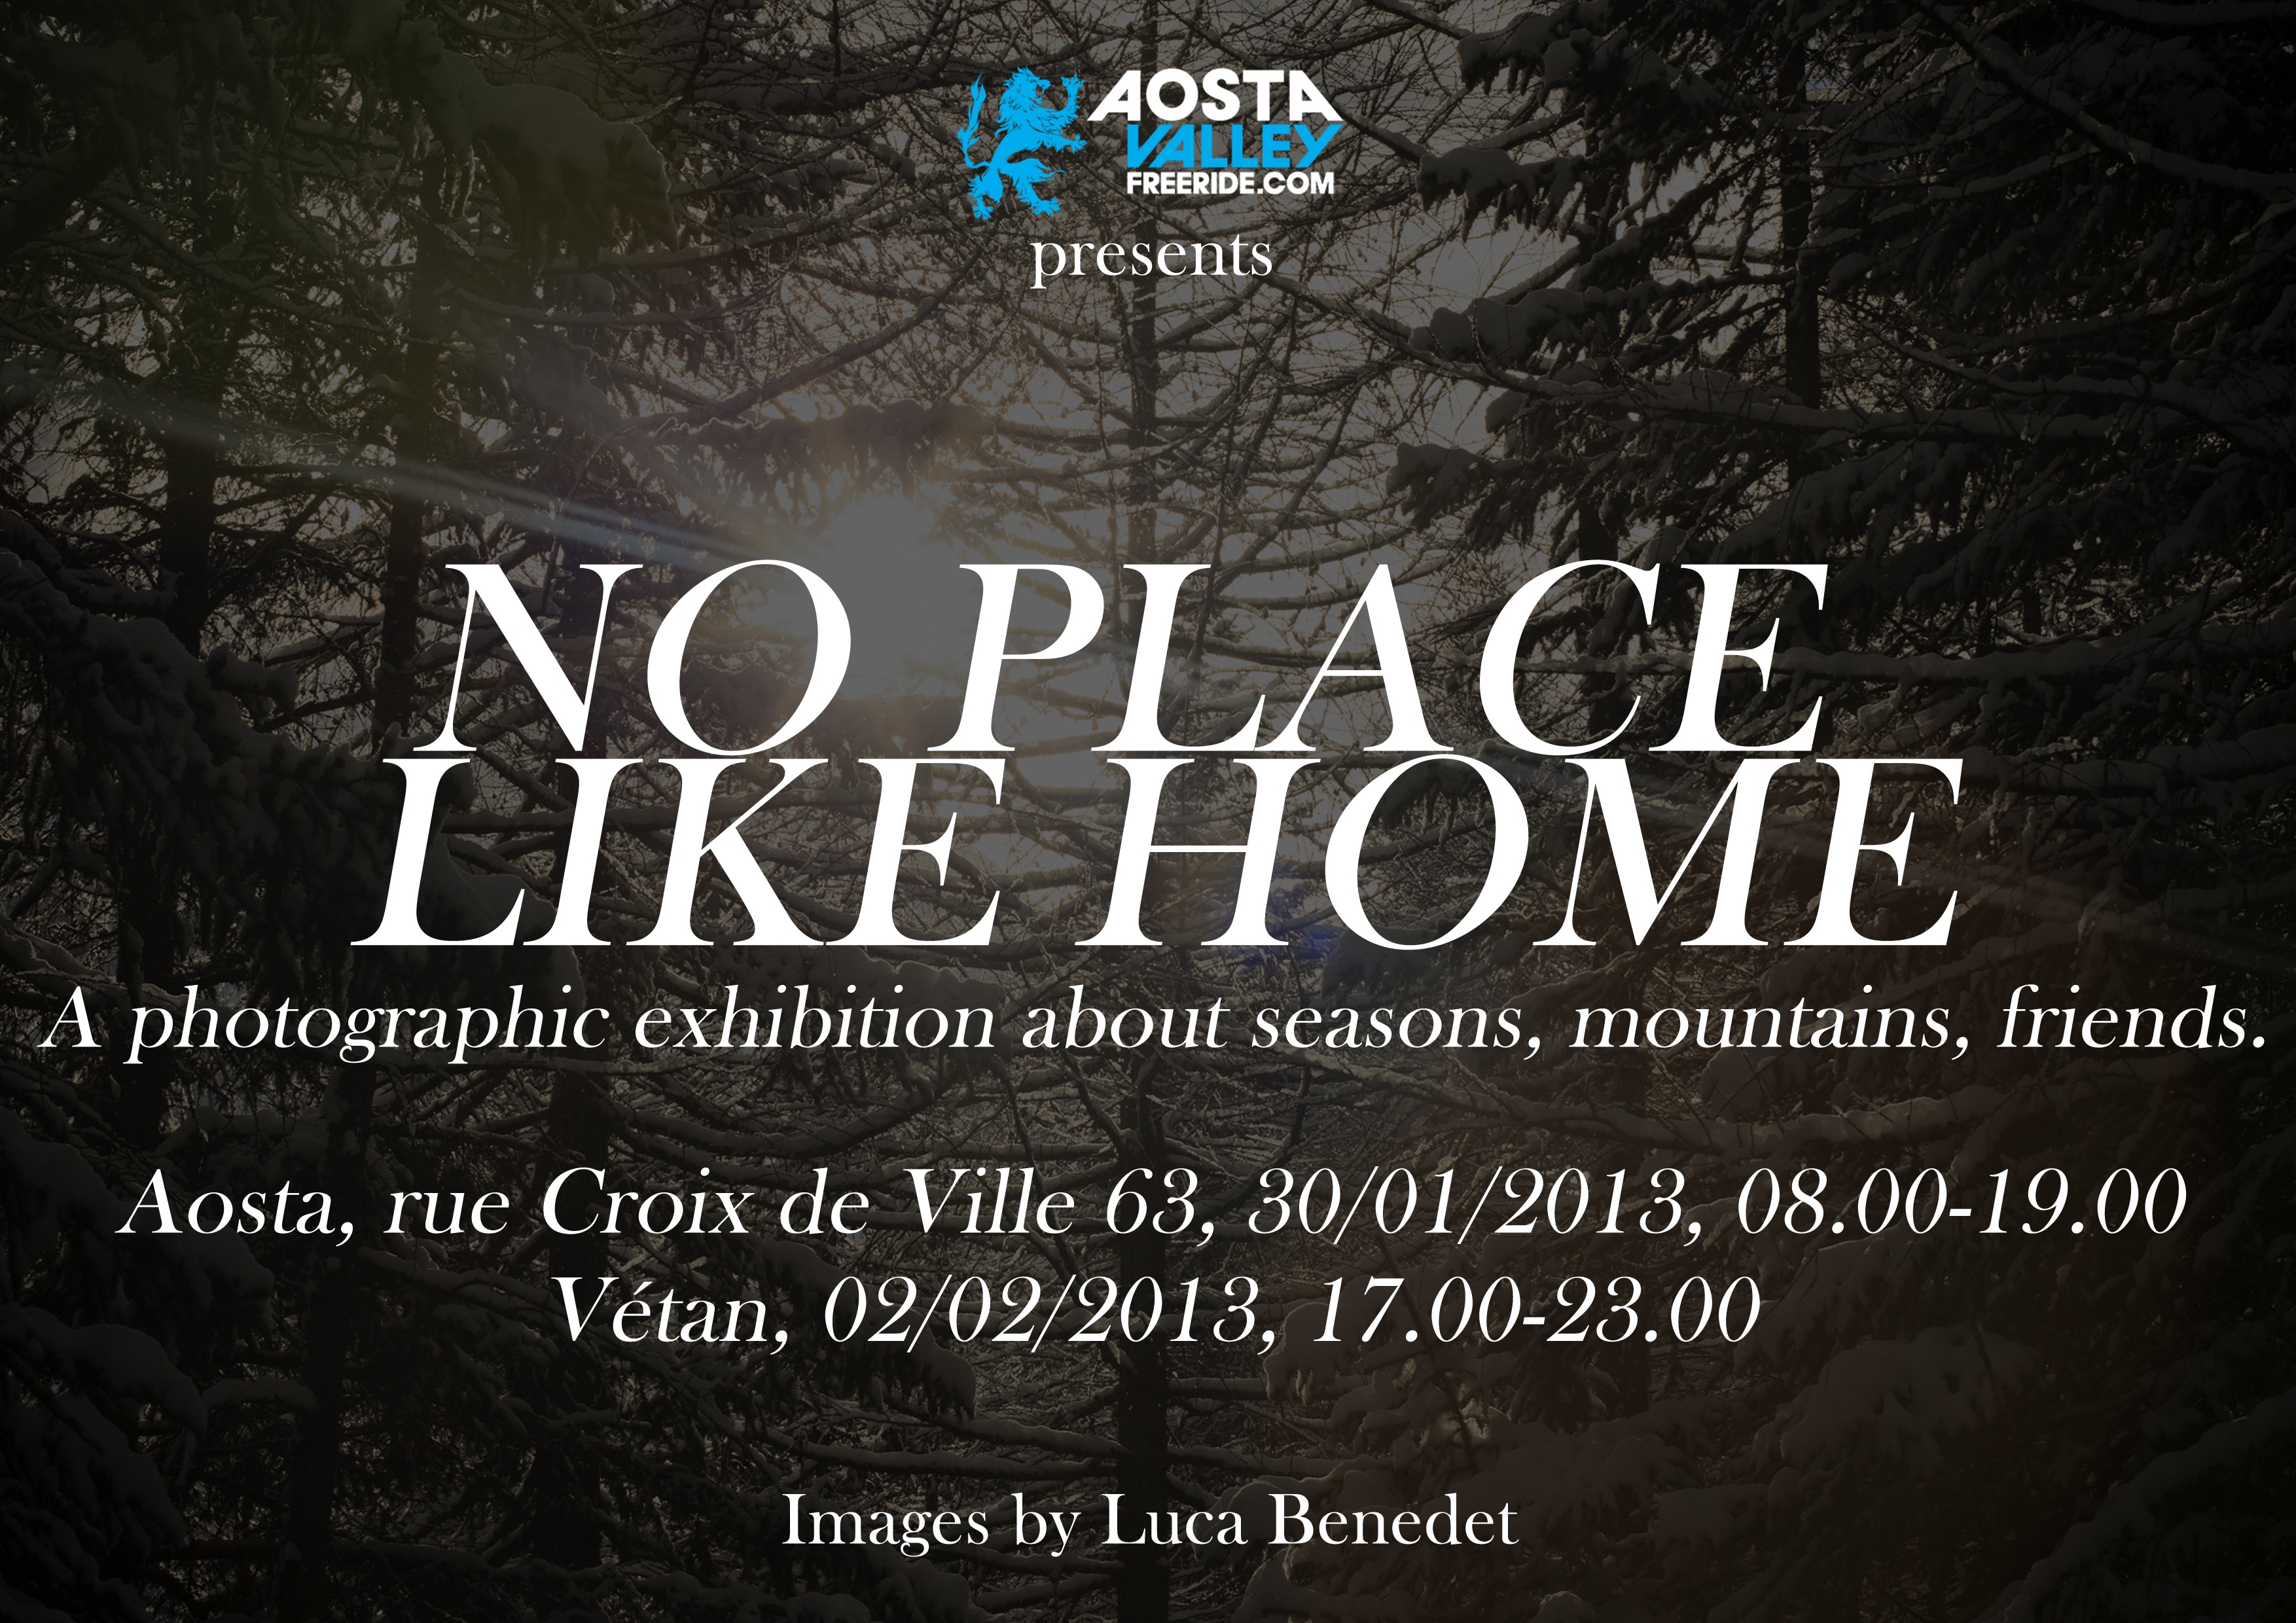 AostaValleyFreeride presents No Place Like Home